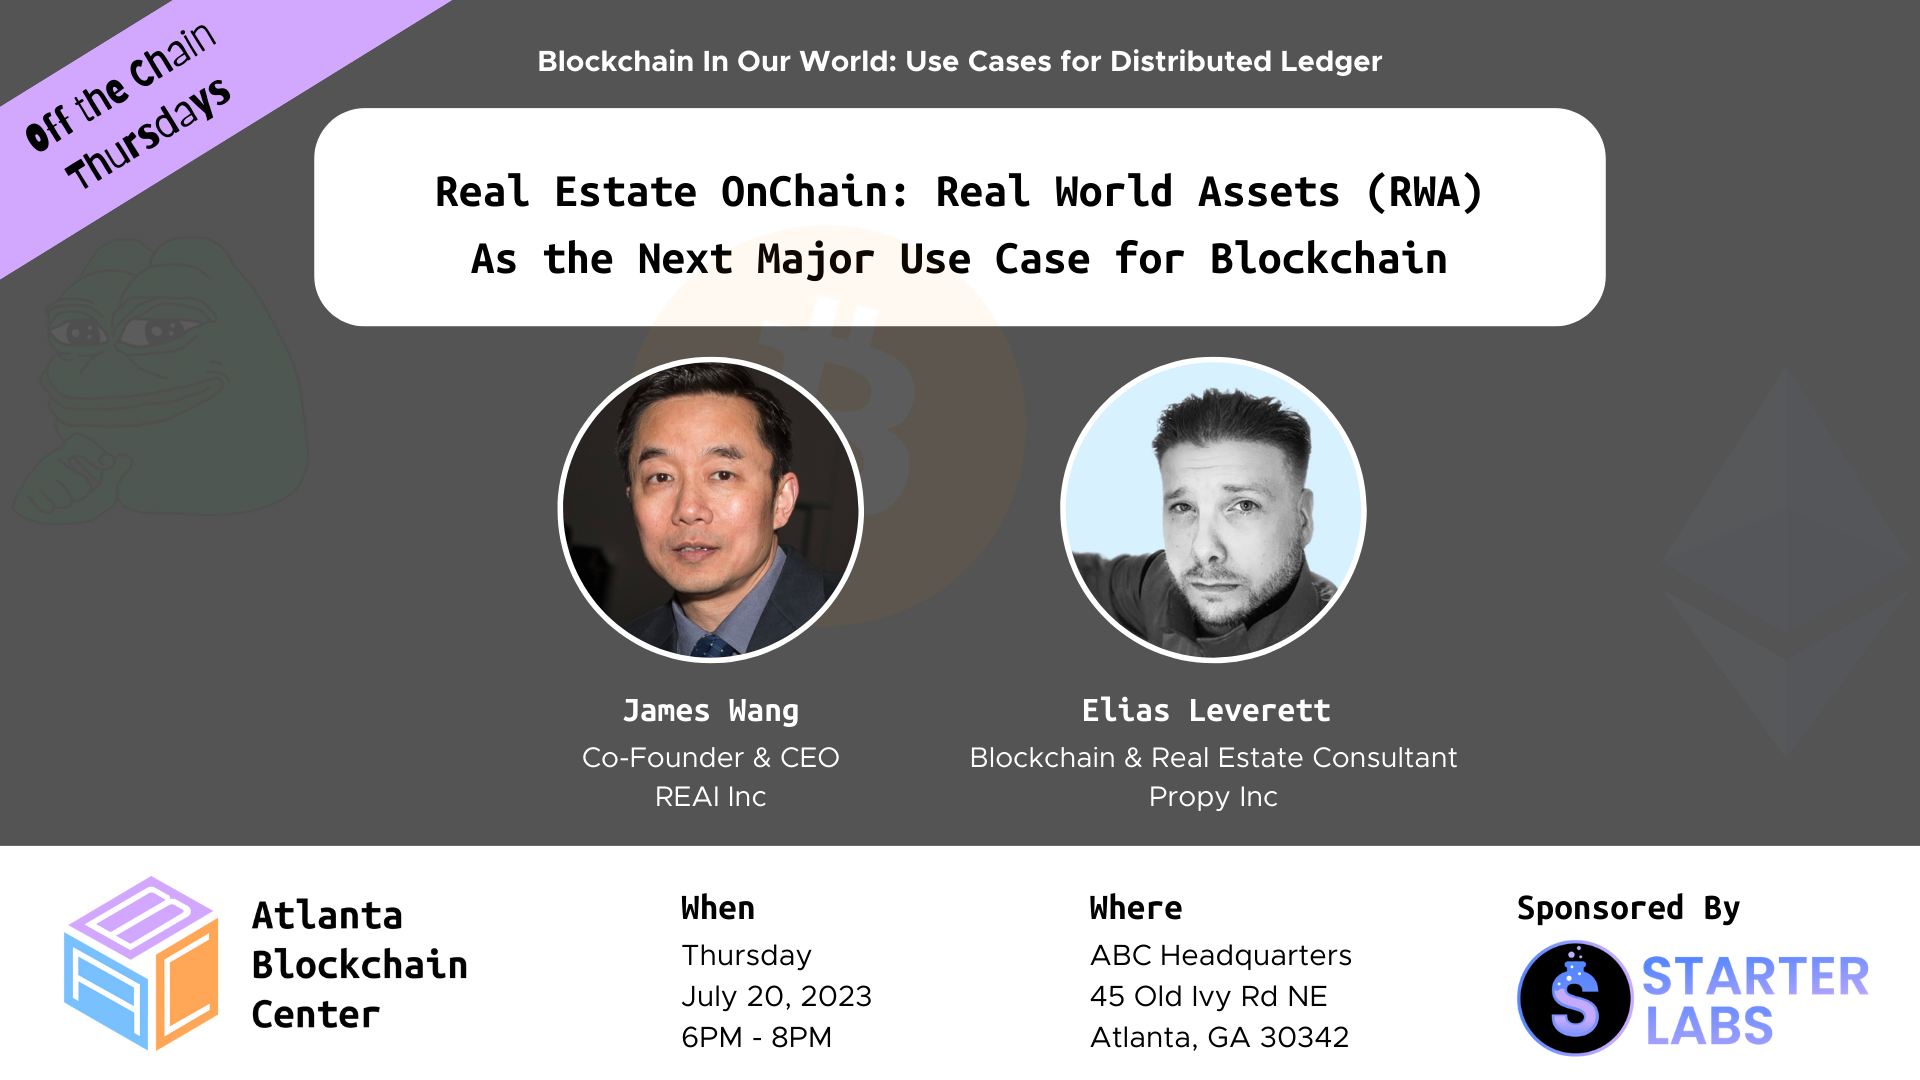 Real Estate OnChain: Real World Assets (RWA) As the Next Major Use Case